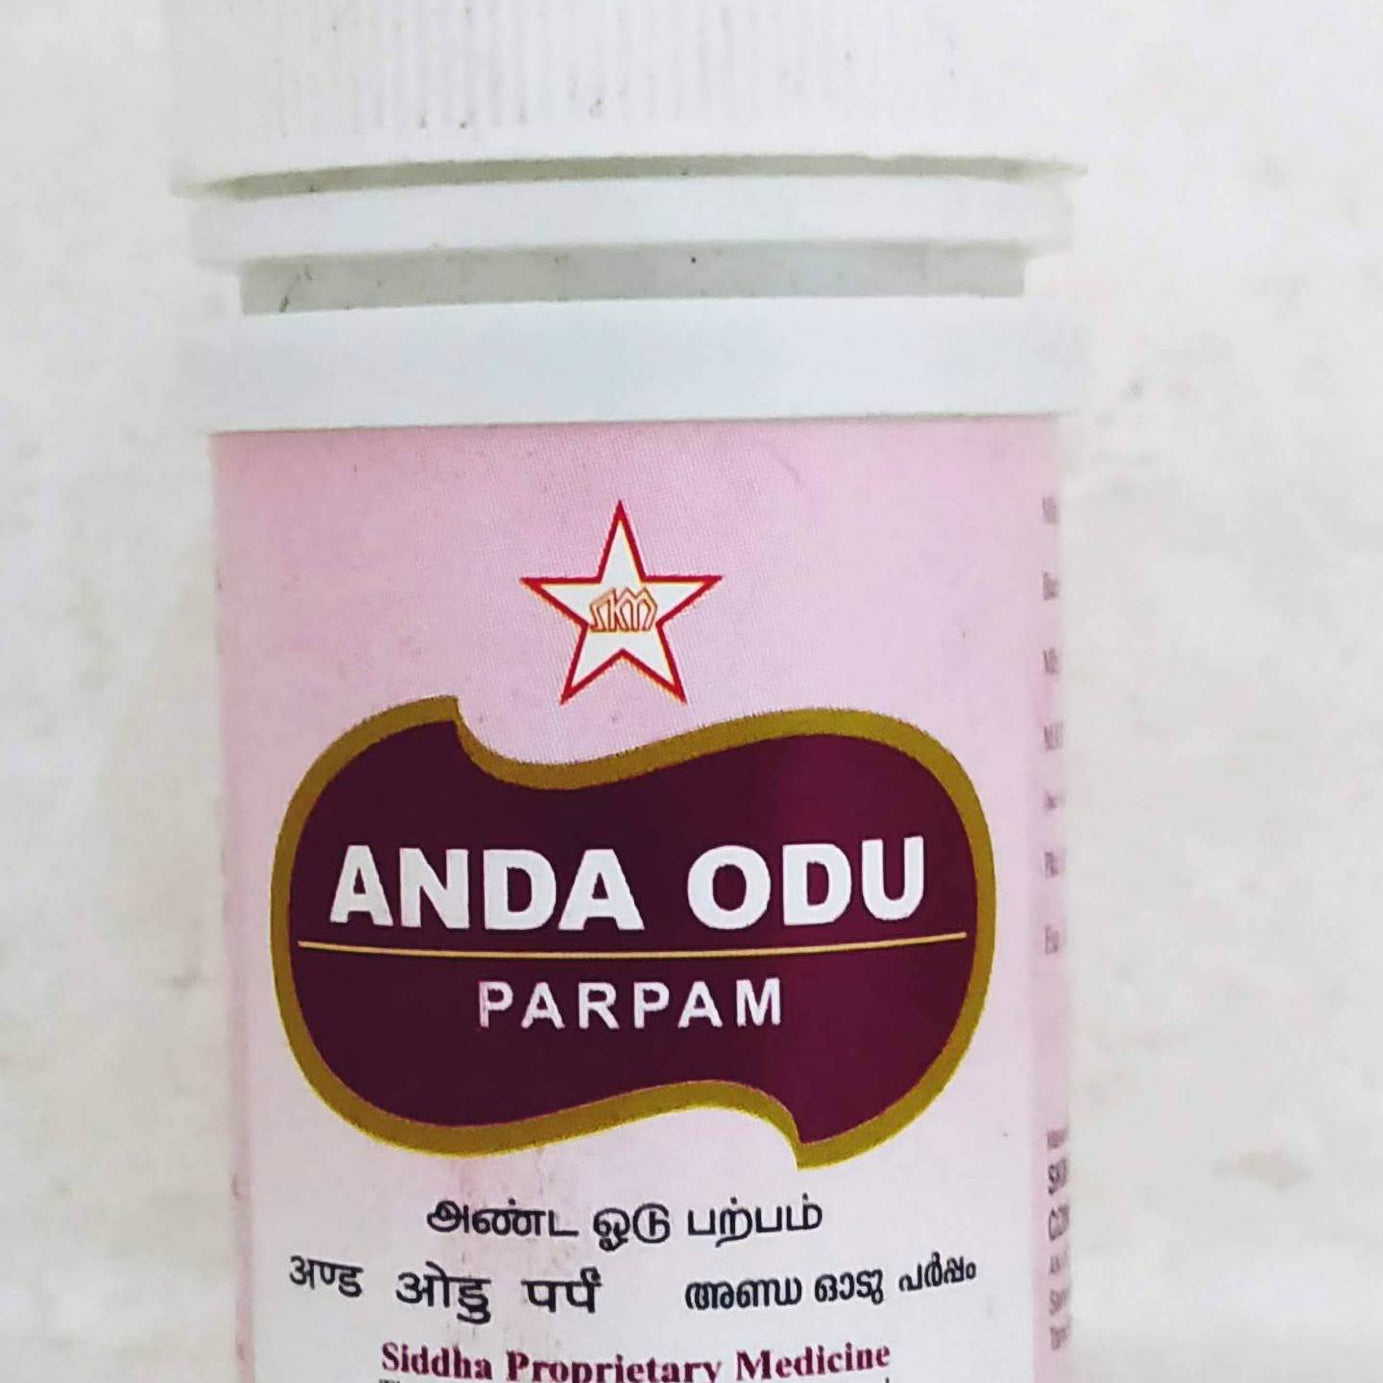 Shop Anda Odu Parpam 10gm at price 170.00 from SKM Online - Ayush Care